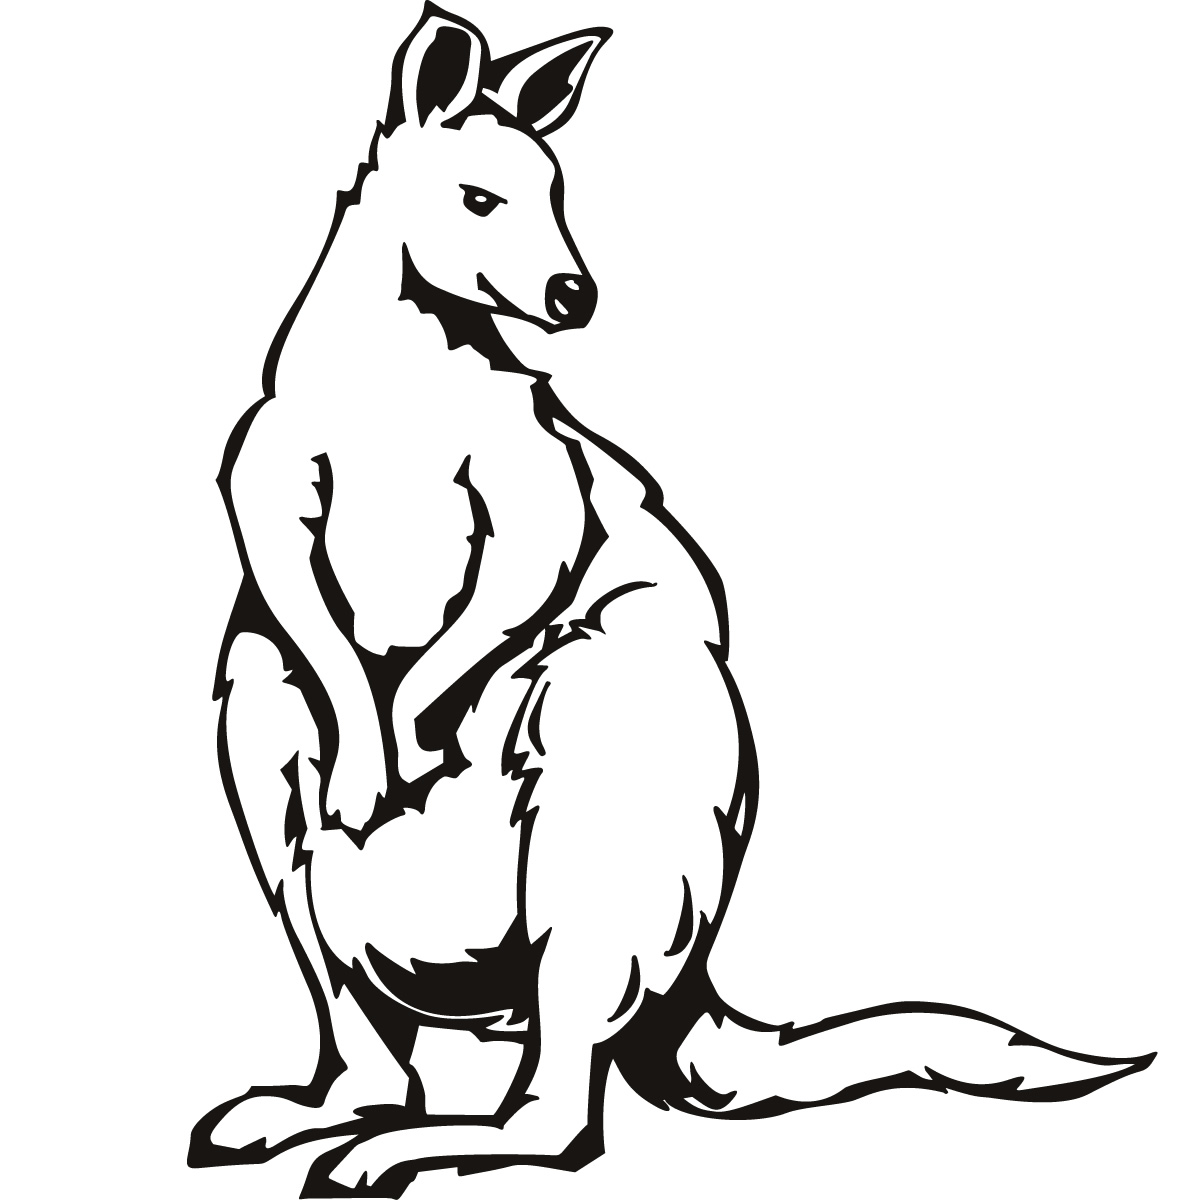 Kangaroo coloring pages for kids - Coloring Pages & Pictures ...